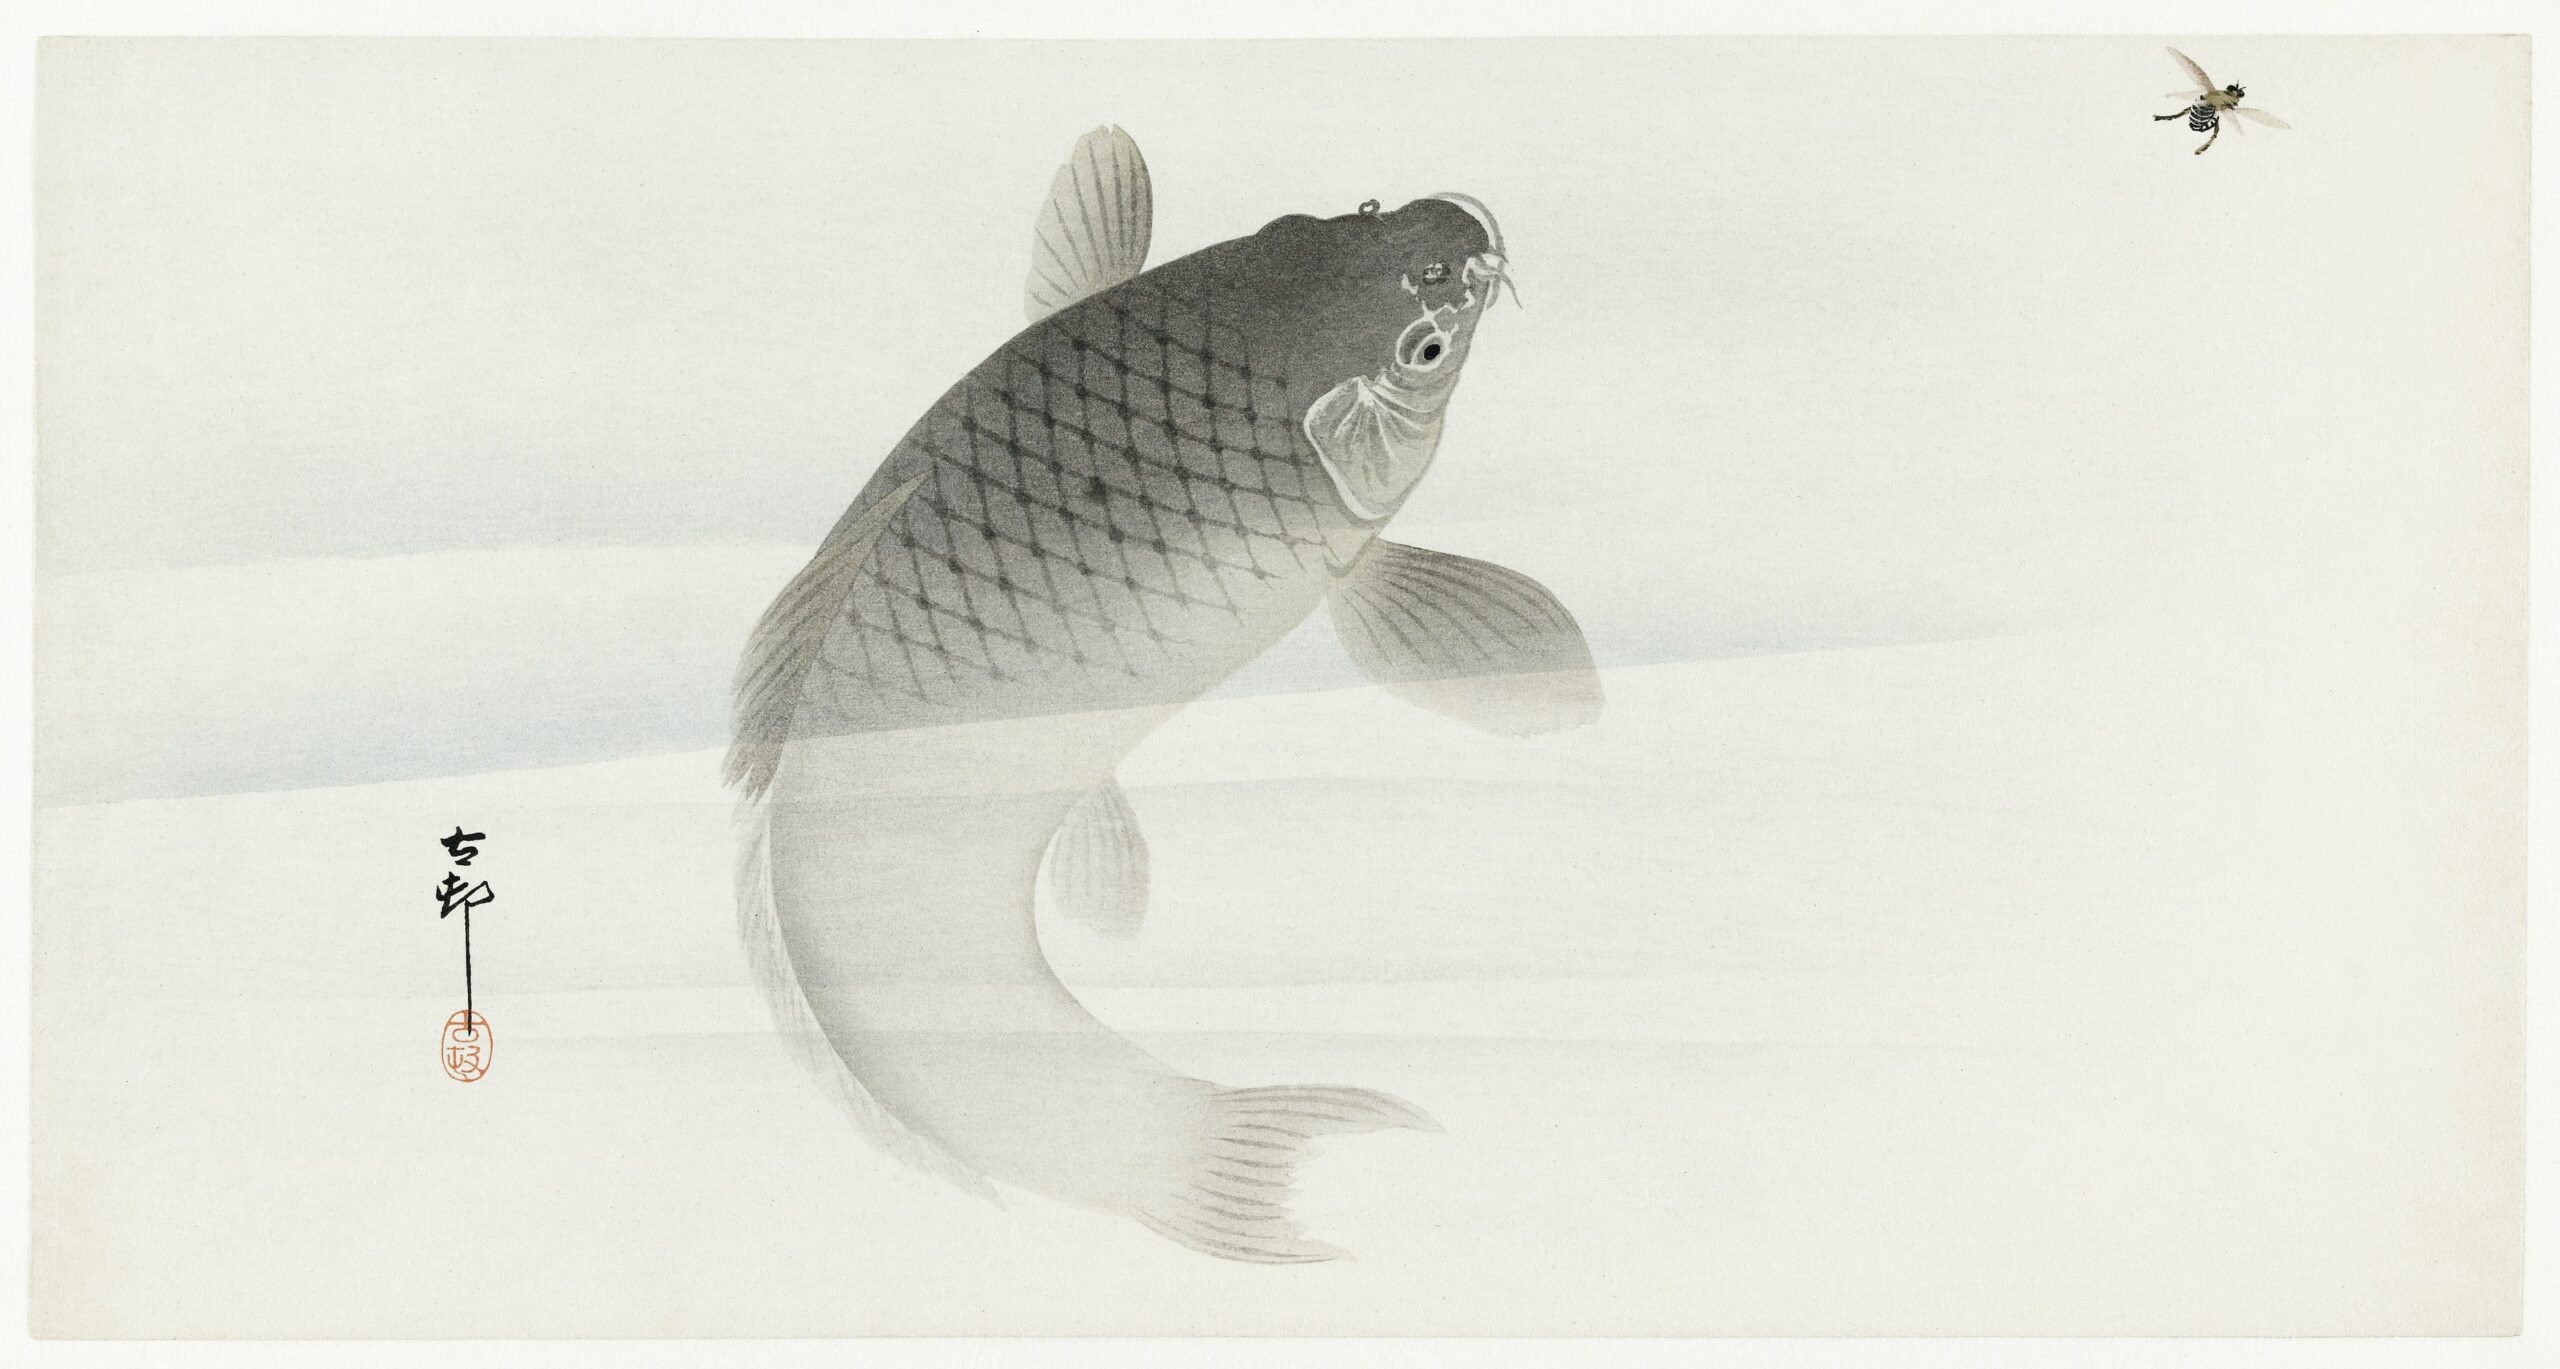 Carp and fly (1900 - 1930) by Ohara Koson (1877-1945). Original from The Rijksmuseum. Digitally enhanced by rawpixel.